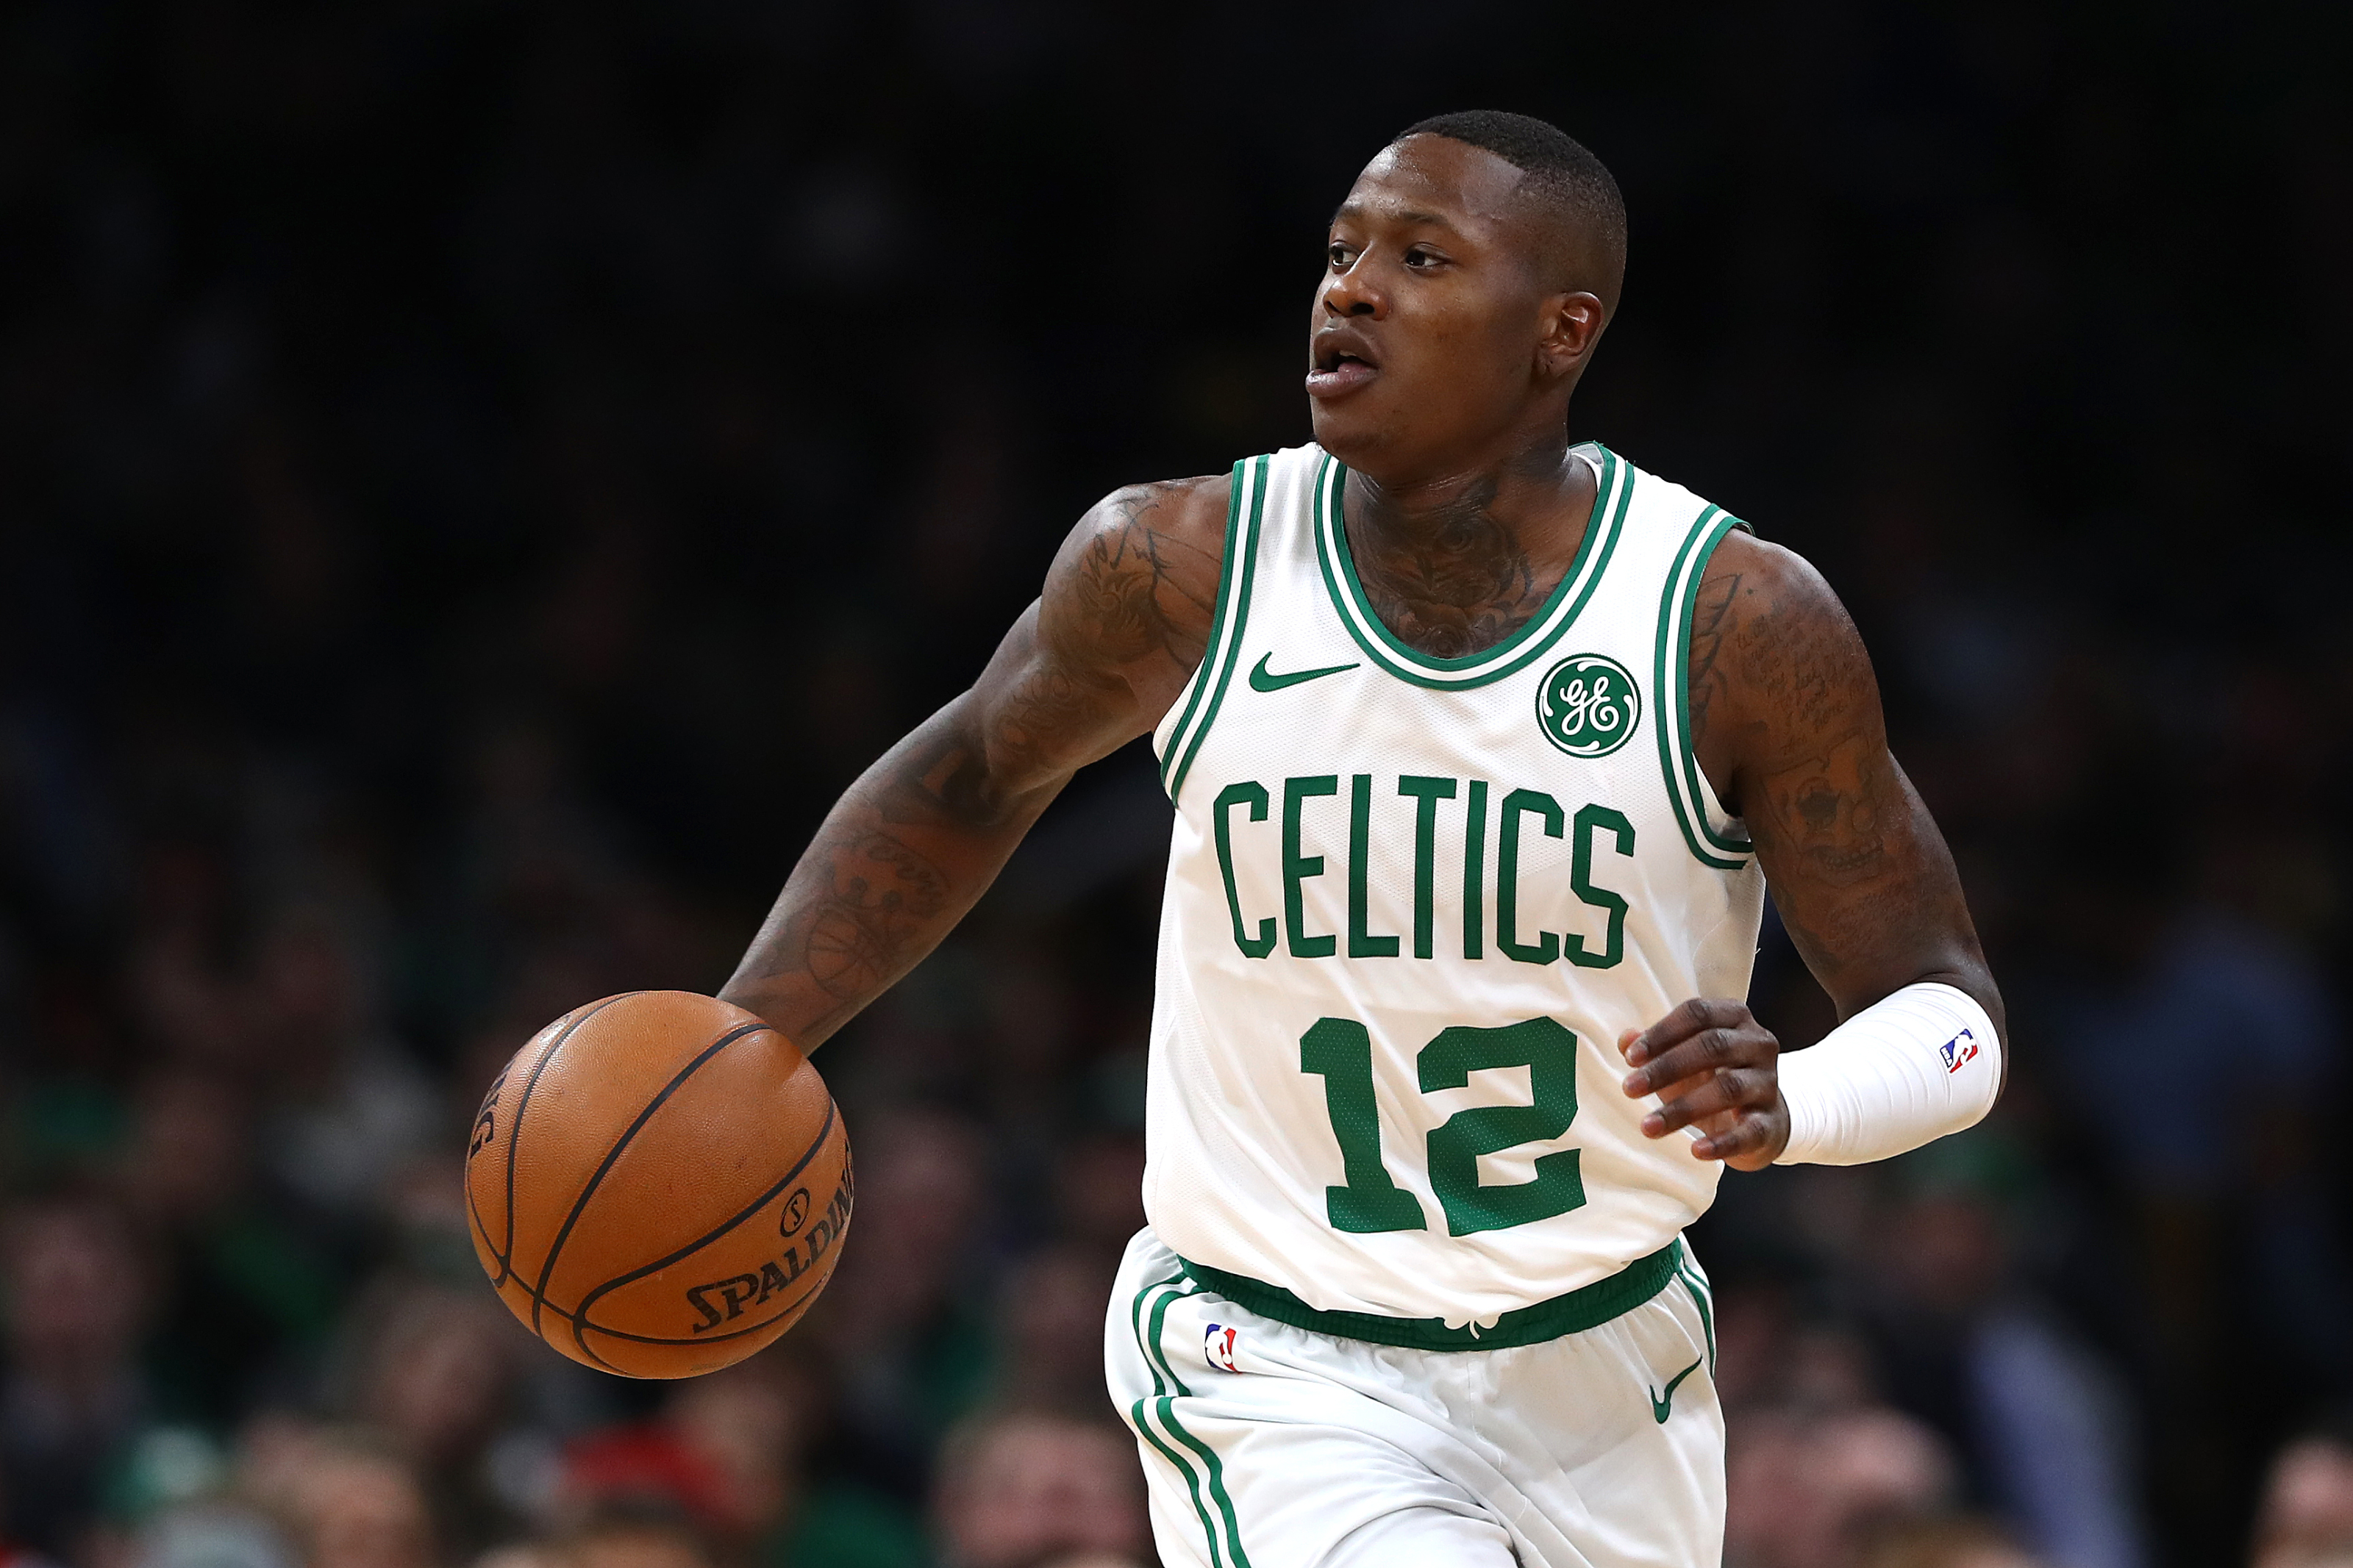 Here's how 'Scary Terry' Rozier came to be a thing - The Boston Globe